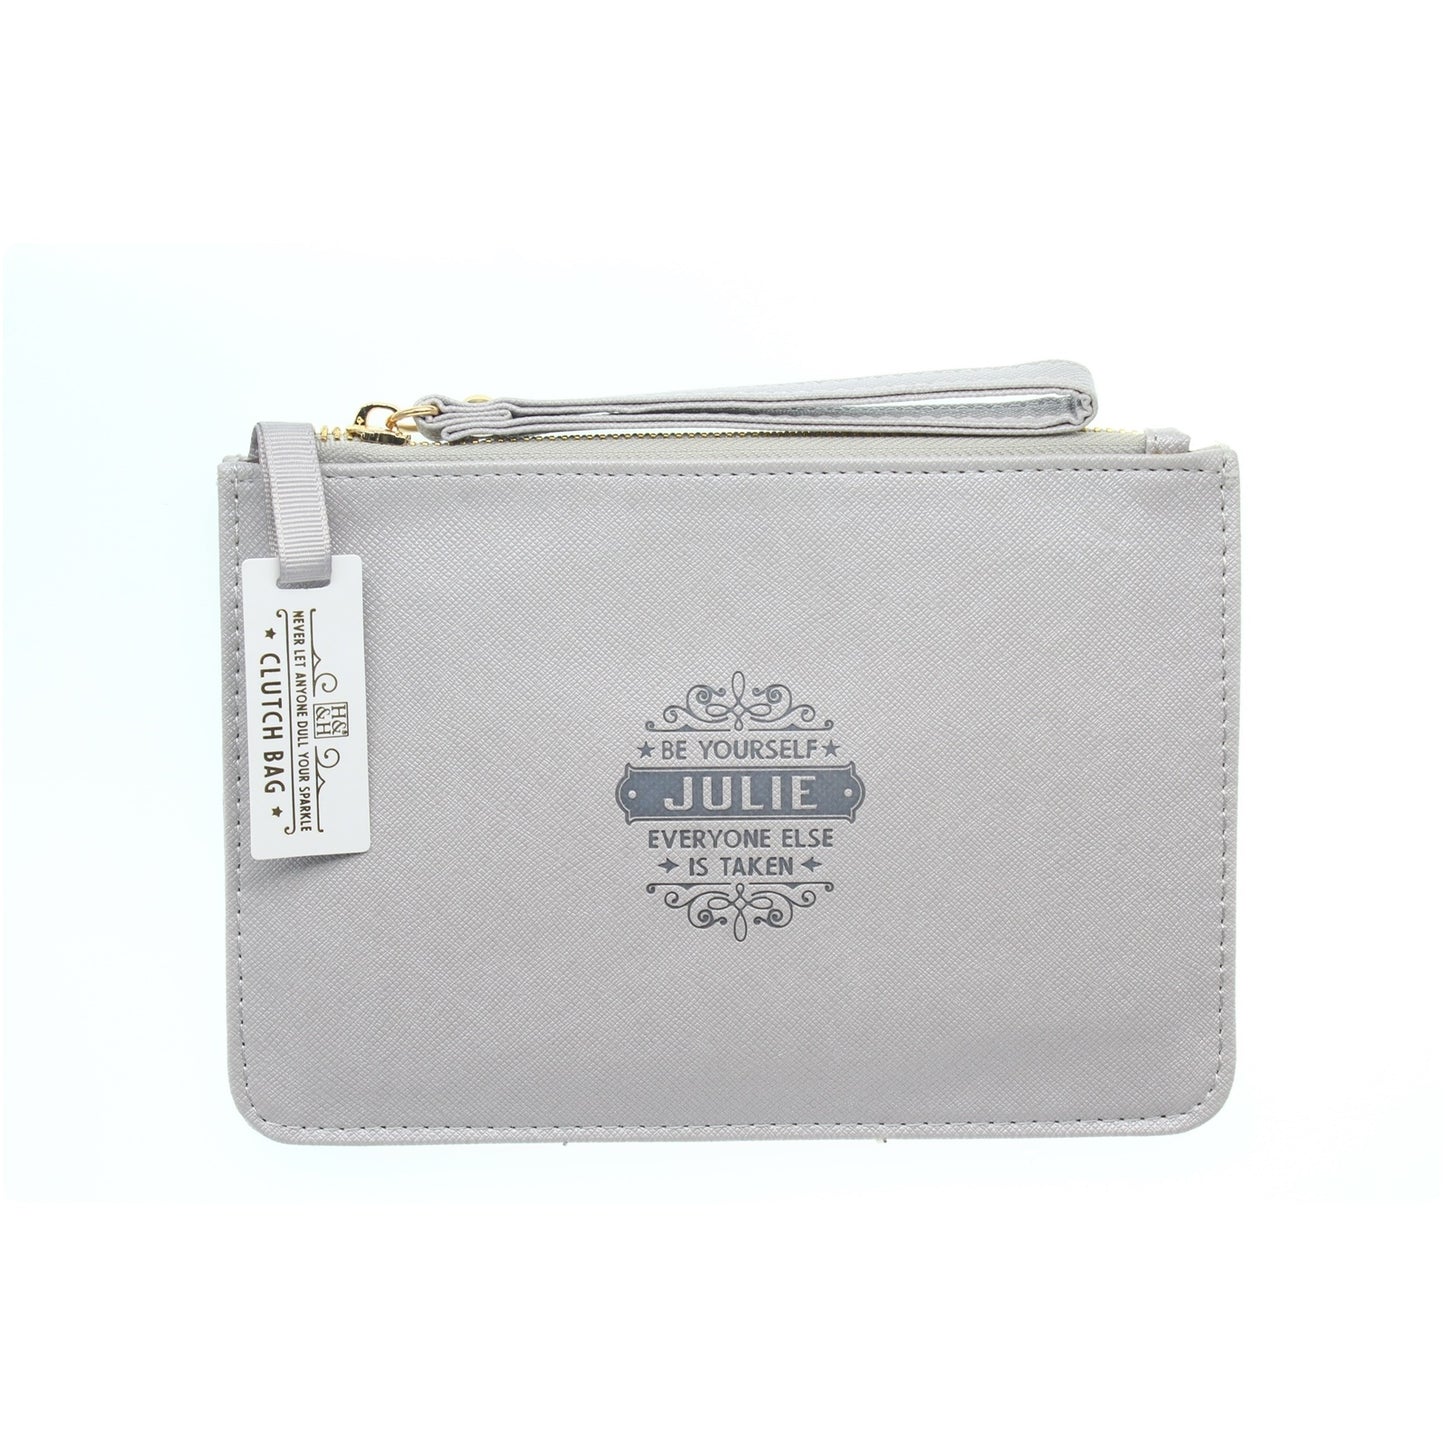 Clutch Bag With Handle & Embossed Text "Julie"